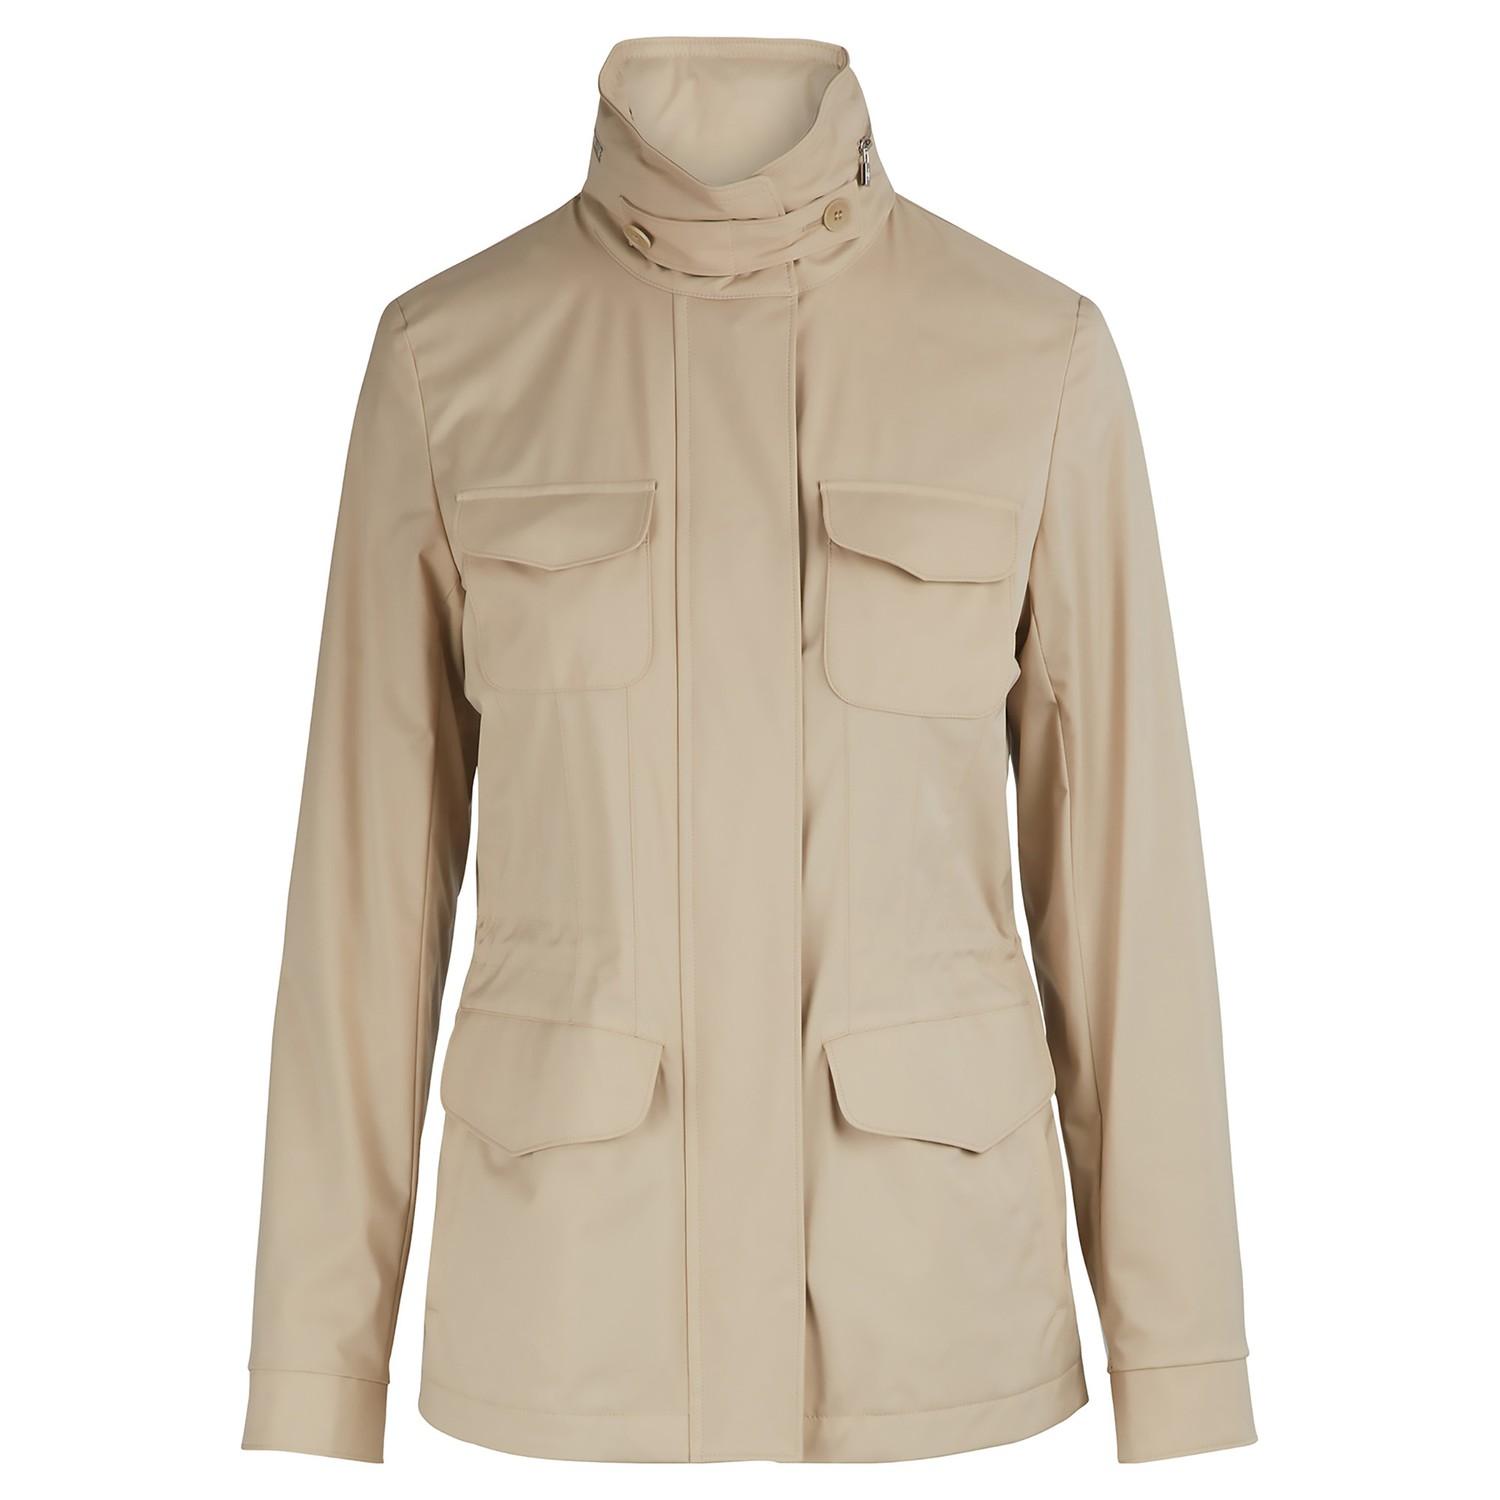 Loro Piana Traveller Jacket in Sand (Natural) - Lyst